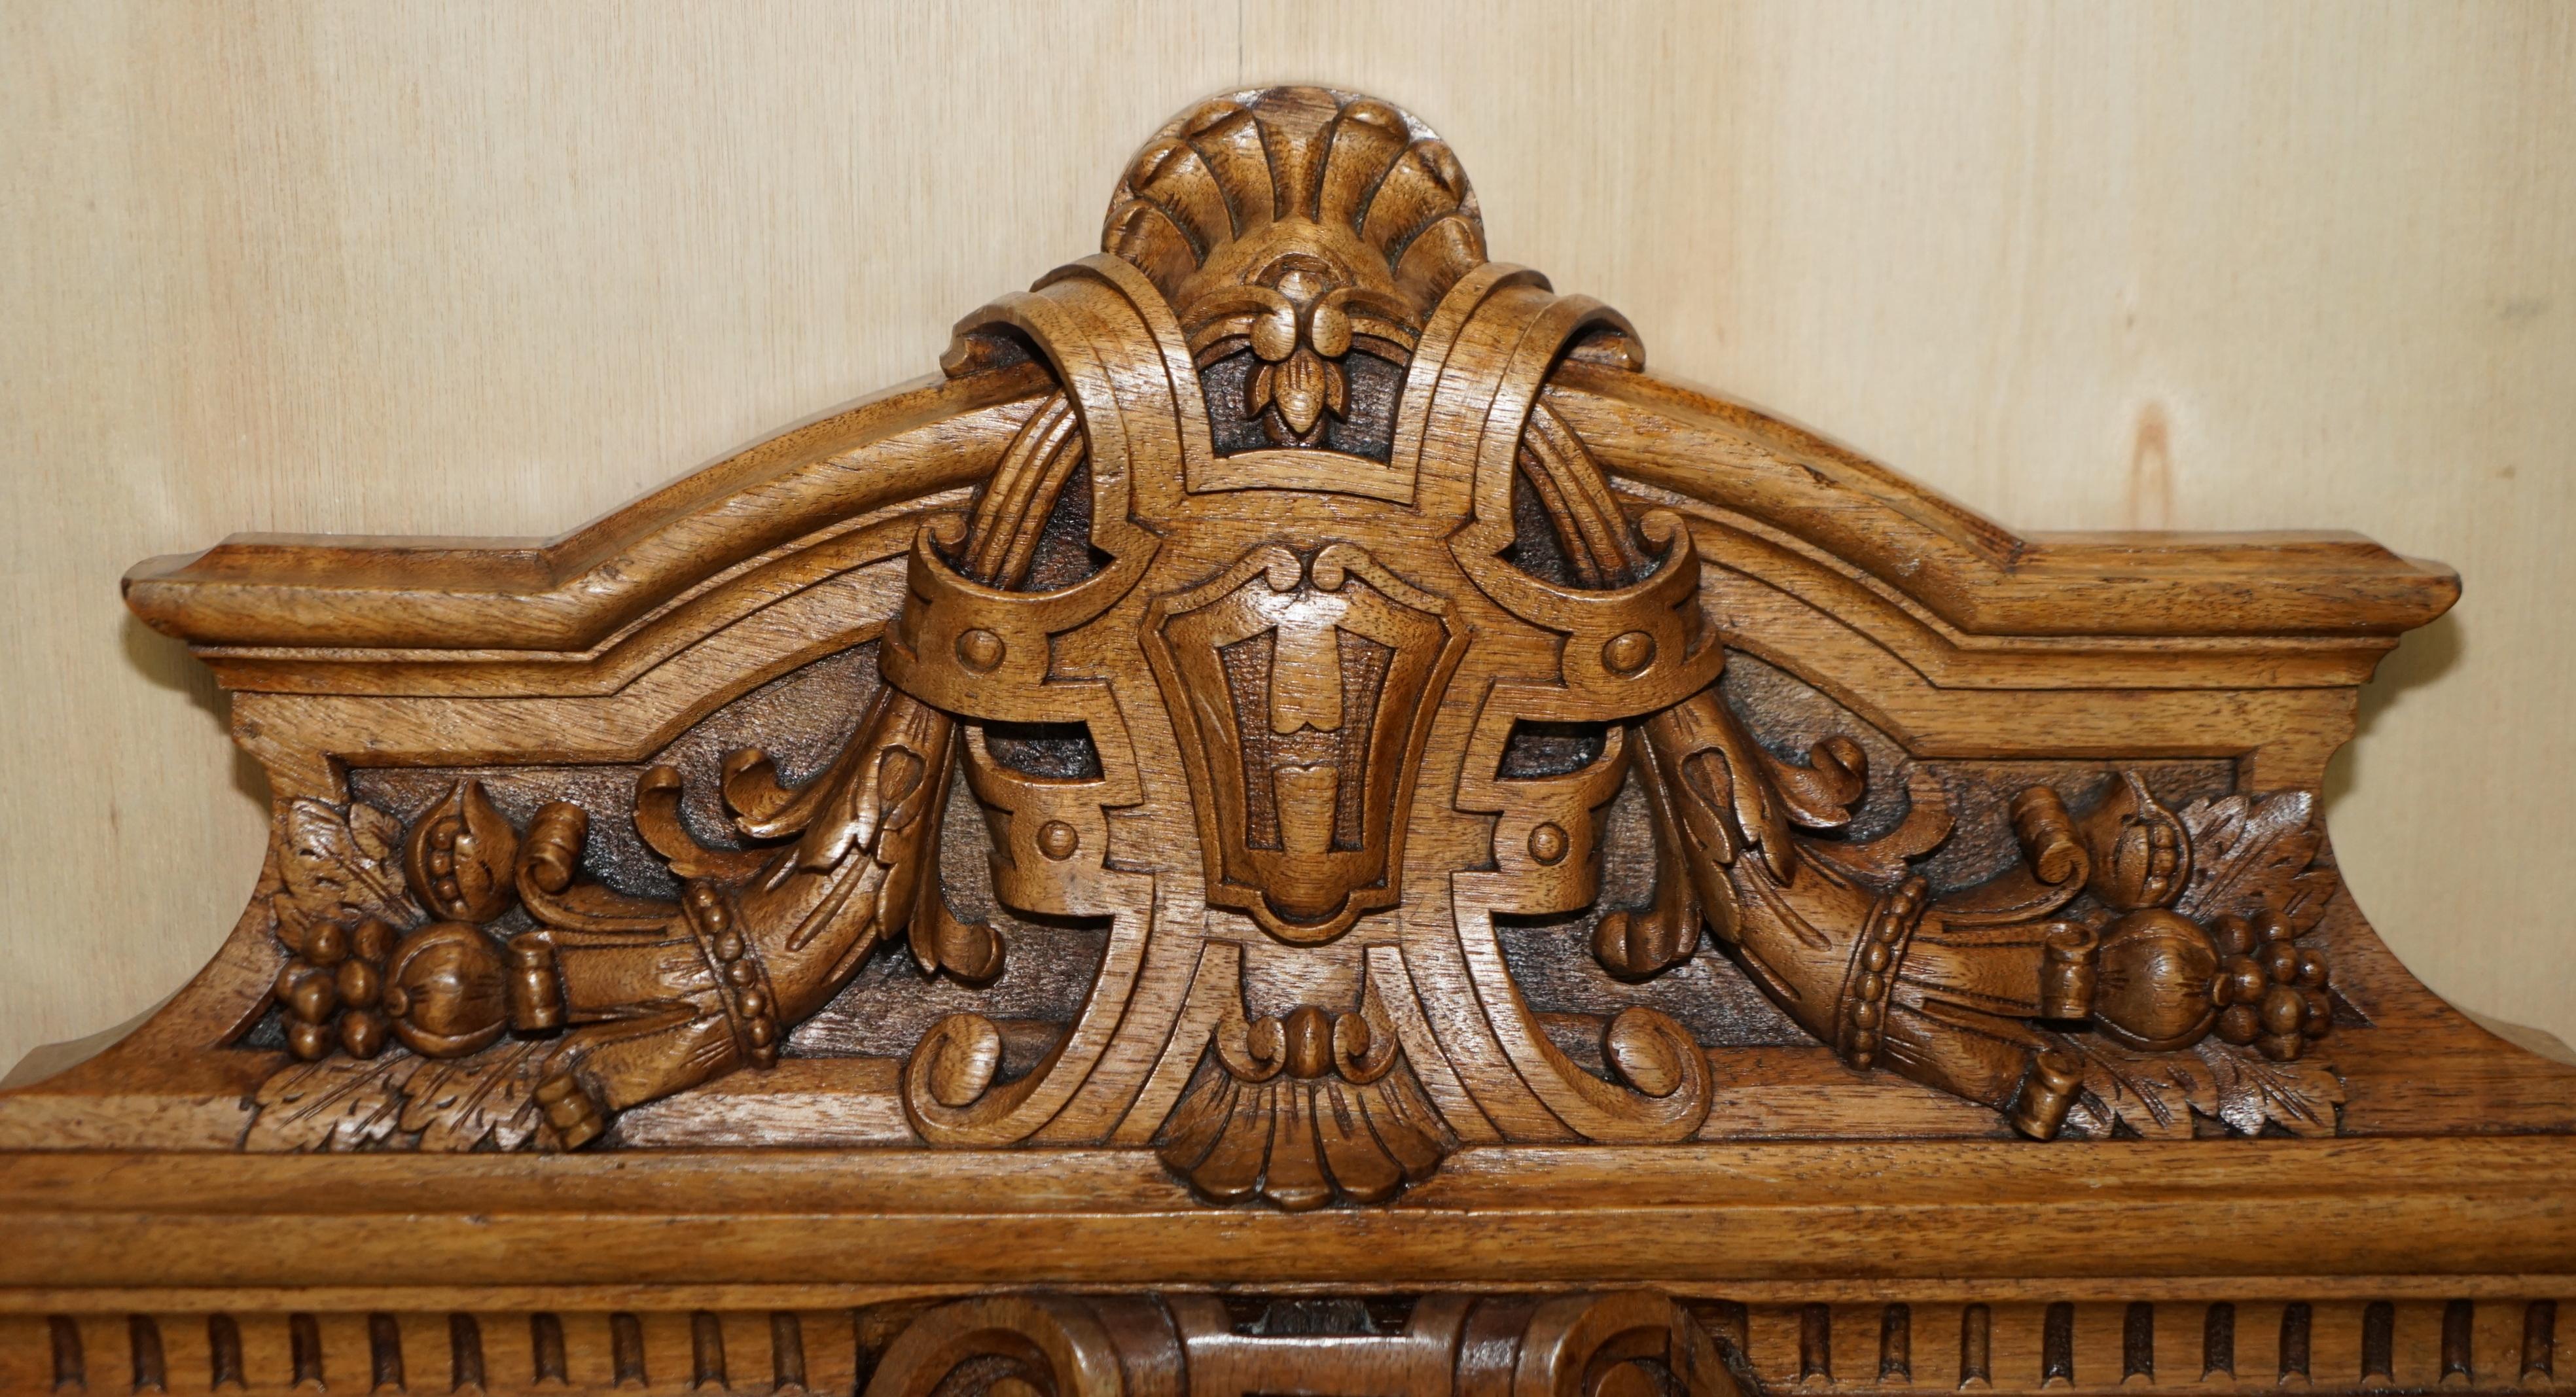 Hand-Crafted Pair of Ornate Carved Antique Italian Throne Chairs with Griffins / Dragons For Sale